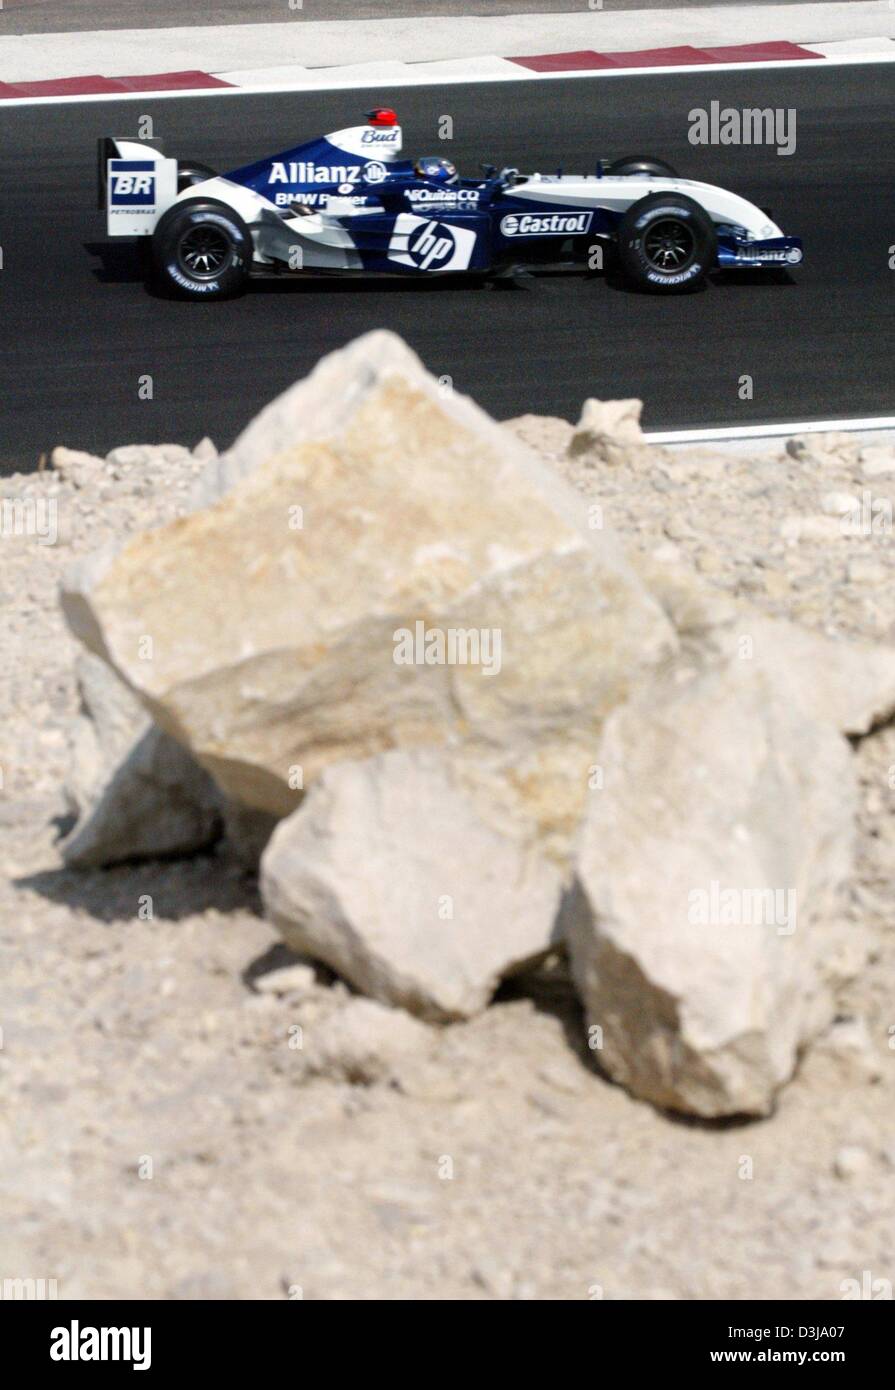 (dpa) - Colombian formula one pilot Juan Pablo Montoya steers his BMW-Williams around a curve passing a rock in the foreground on the new formula one race course in Manama, Bahrain, 2 April 2004. Montoya drove the second fastest time in the second free practise session in Bahrain. The Formula 1 Grand Prix of Bahrain will take place for the first time this Sunday, 4 April 2004. Stock Photo